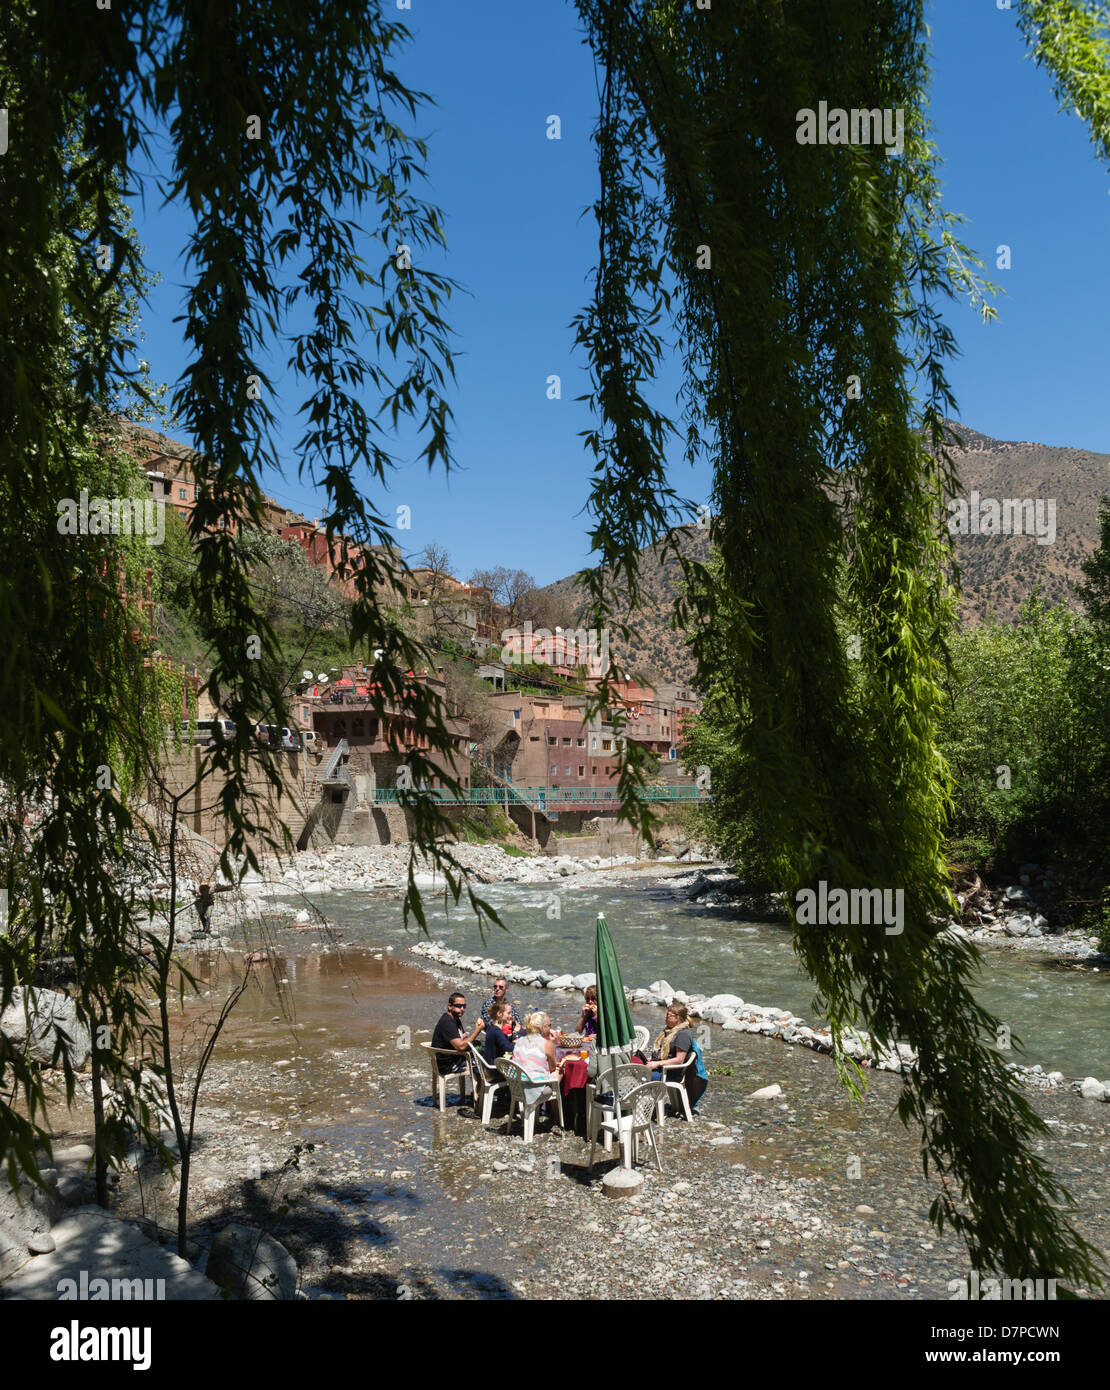 Morocco, Marrakesh - Sti Fatma, Ourika Valley - family dining at a table set right next to the river. Stock Photo